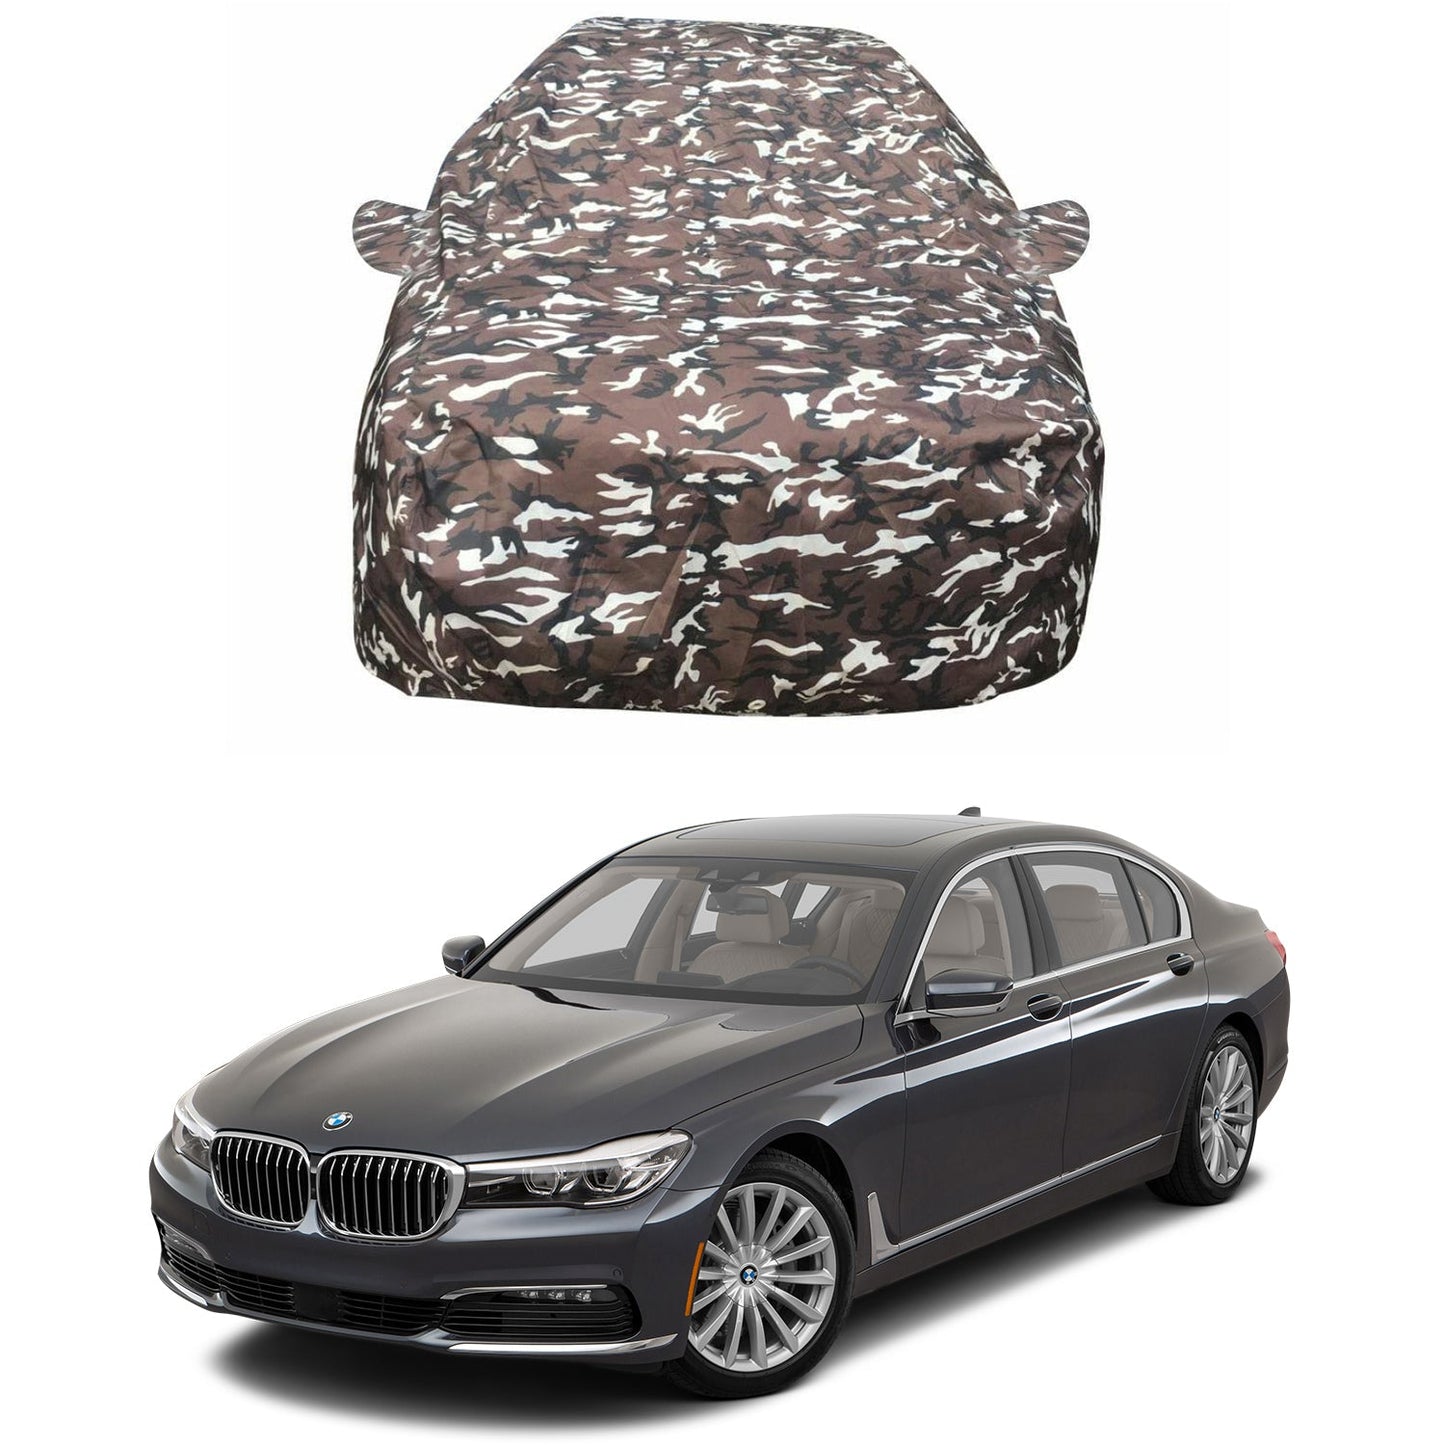 Oshotto Ranger Design Made of 100% Waterproof Fabric Multicolor Car Body Cover with Mirror Pockets For BMW 7 Series